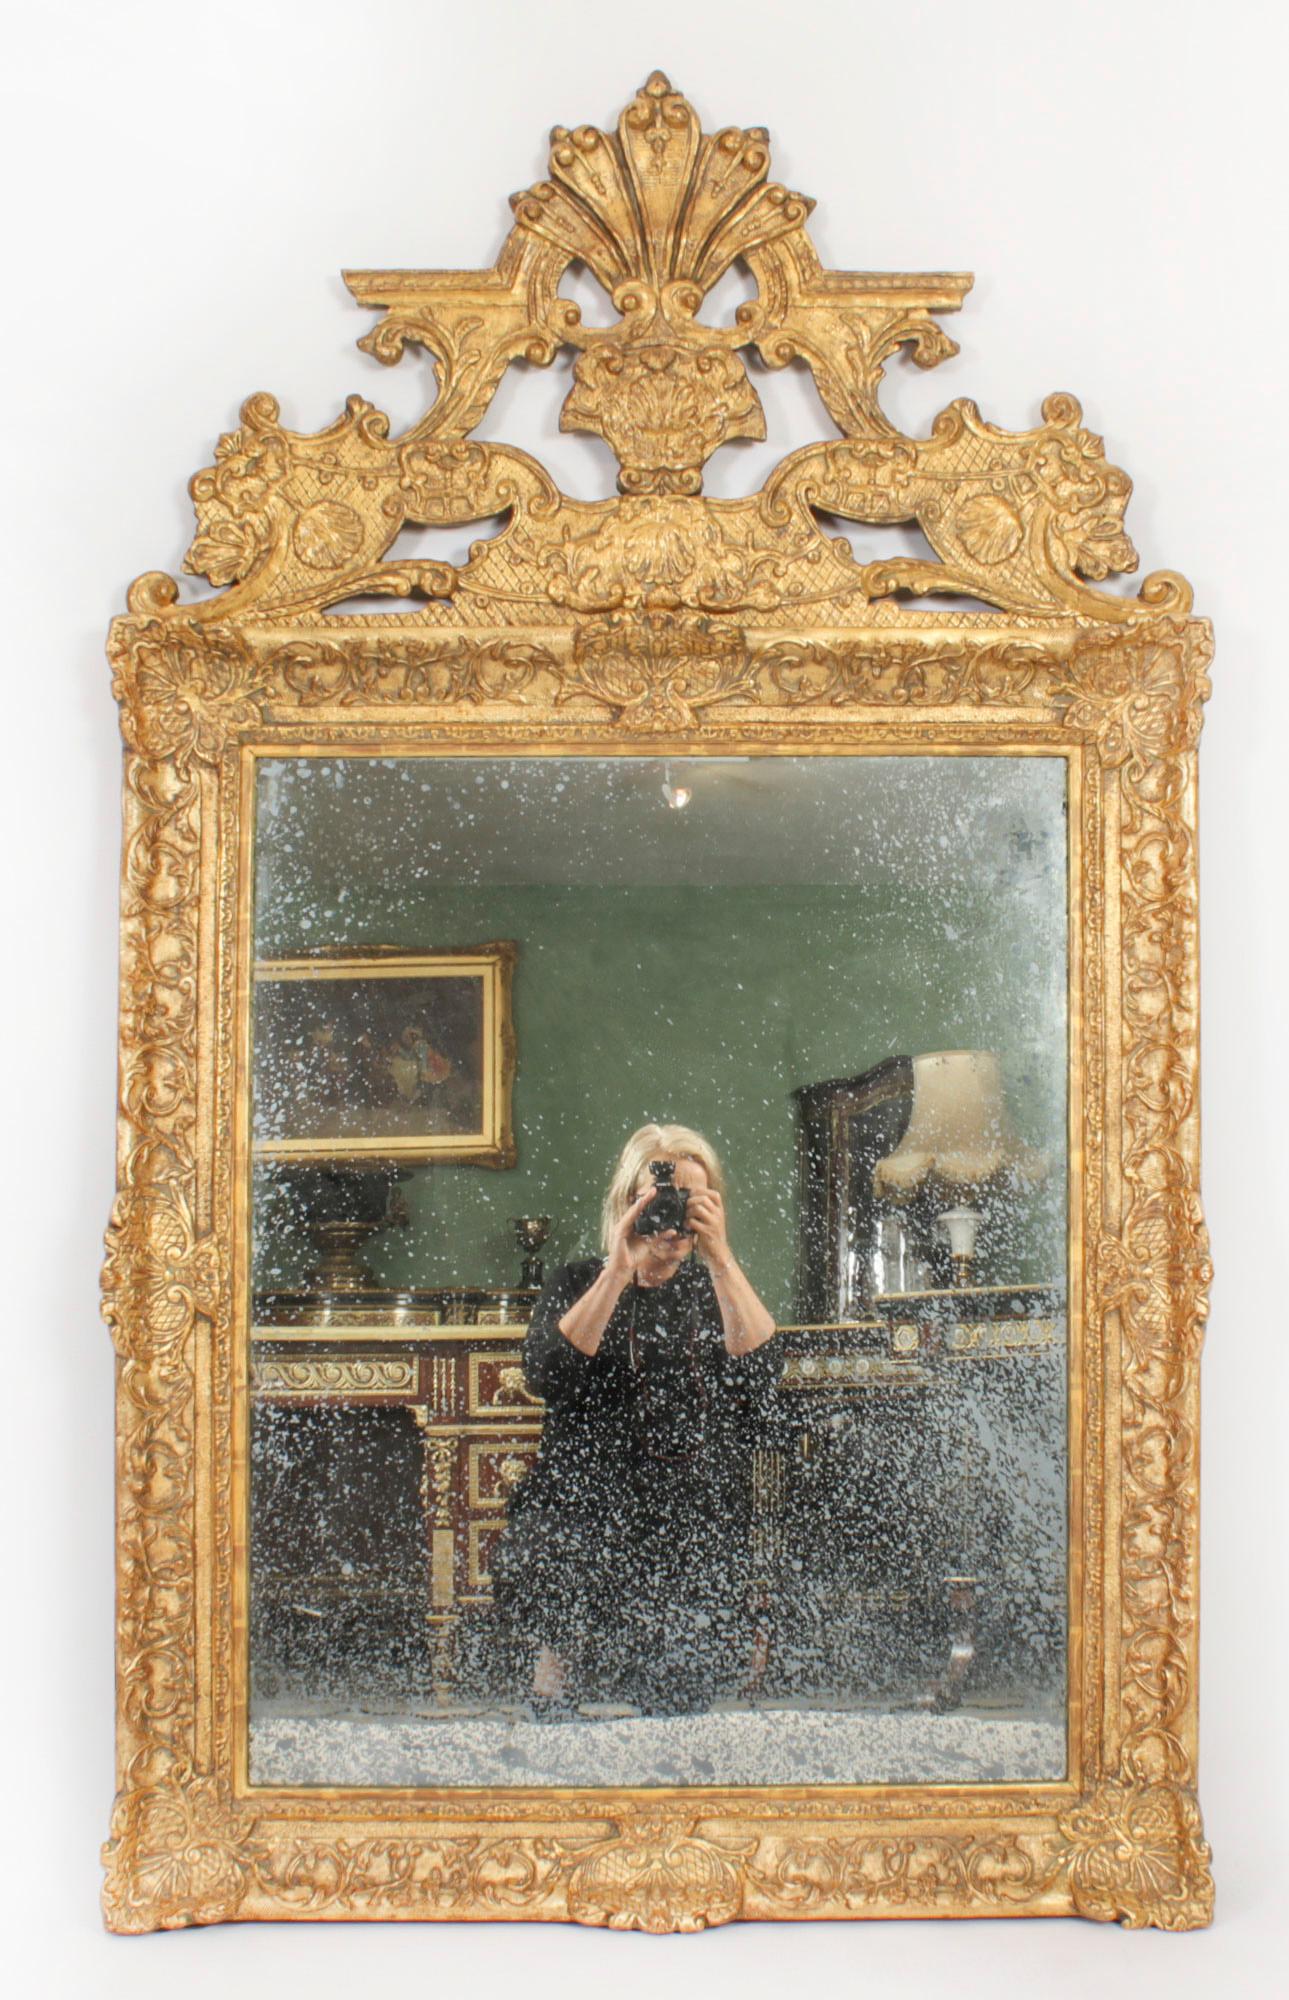 Antique Large French Giltwood Wall Mirror 18th Century - 171x101cm For Sale 8